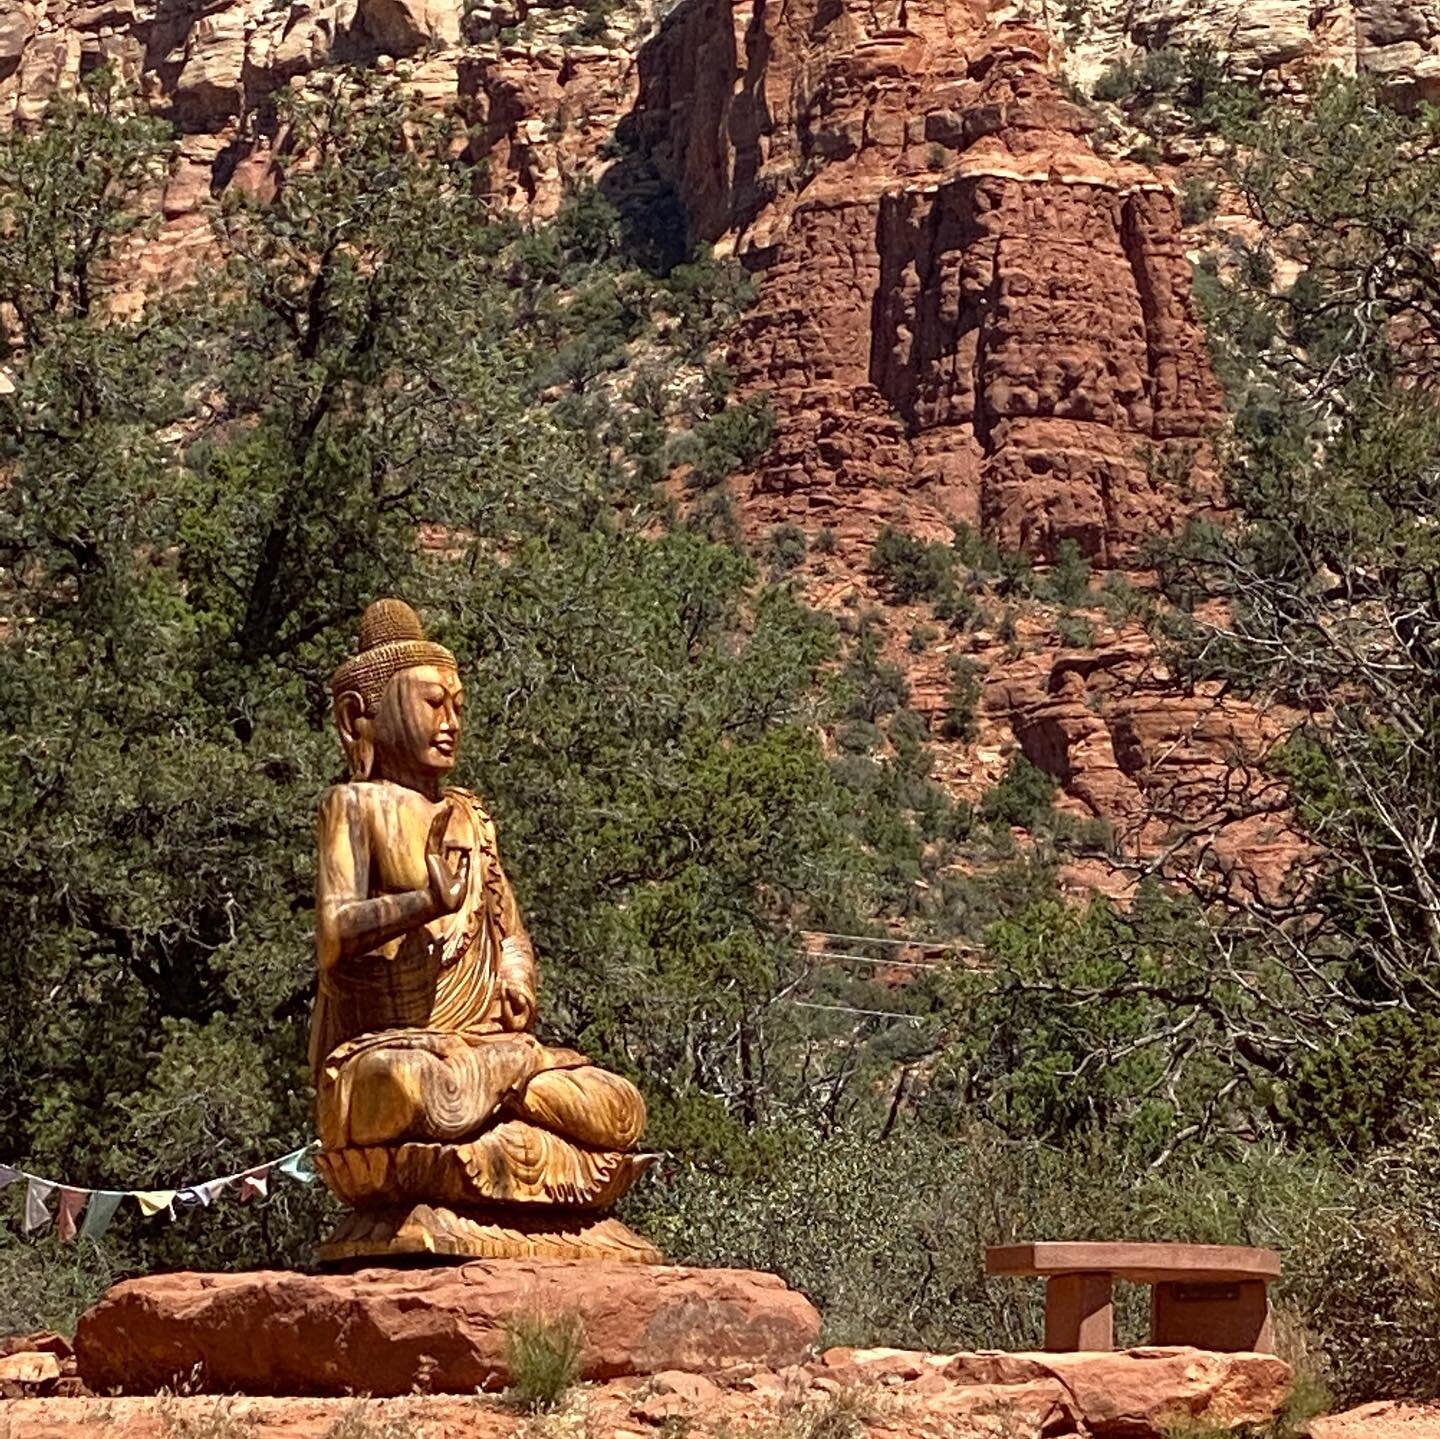 Nature. Breathtaking. Peaceful. Feeling in awe, connected and energized! Spending time in Sedona, AZ. Feeling blessed. Taking in the spectacular views.